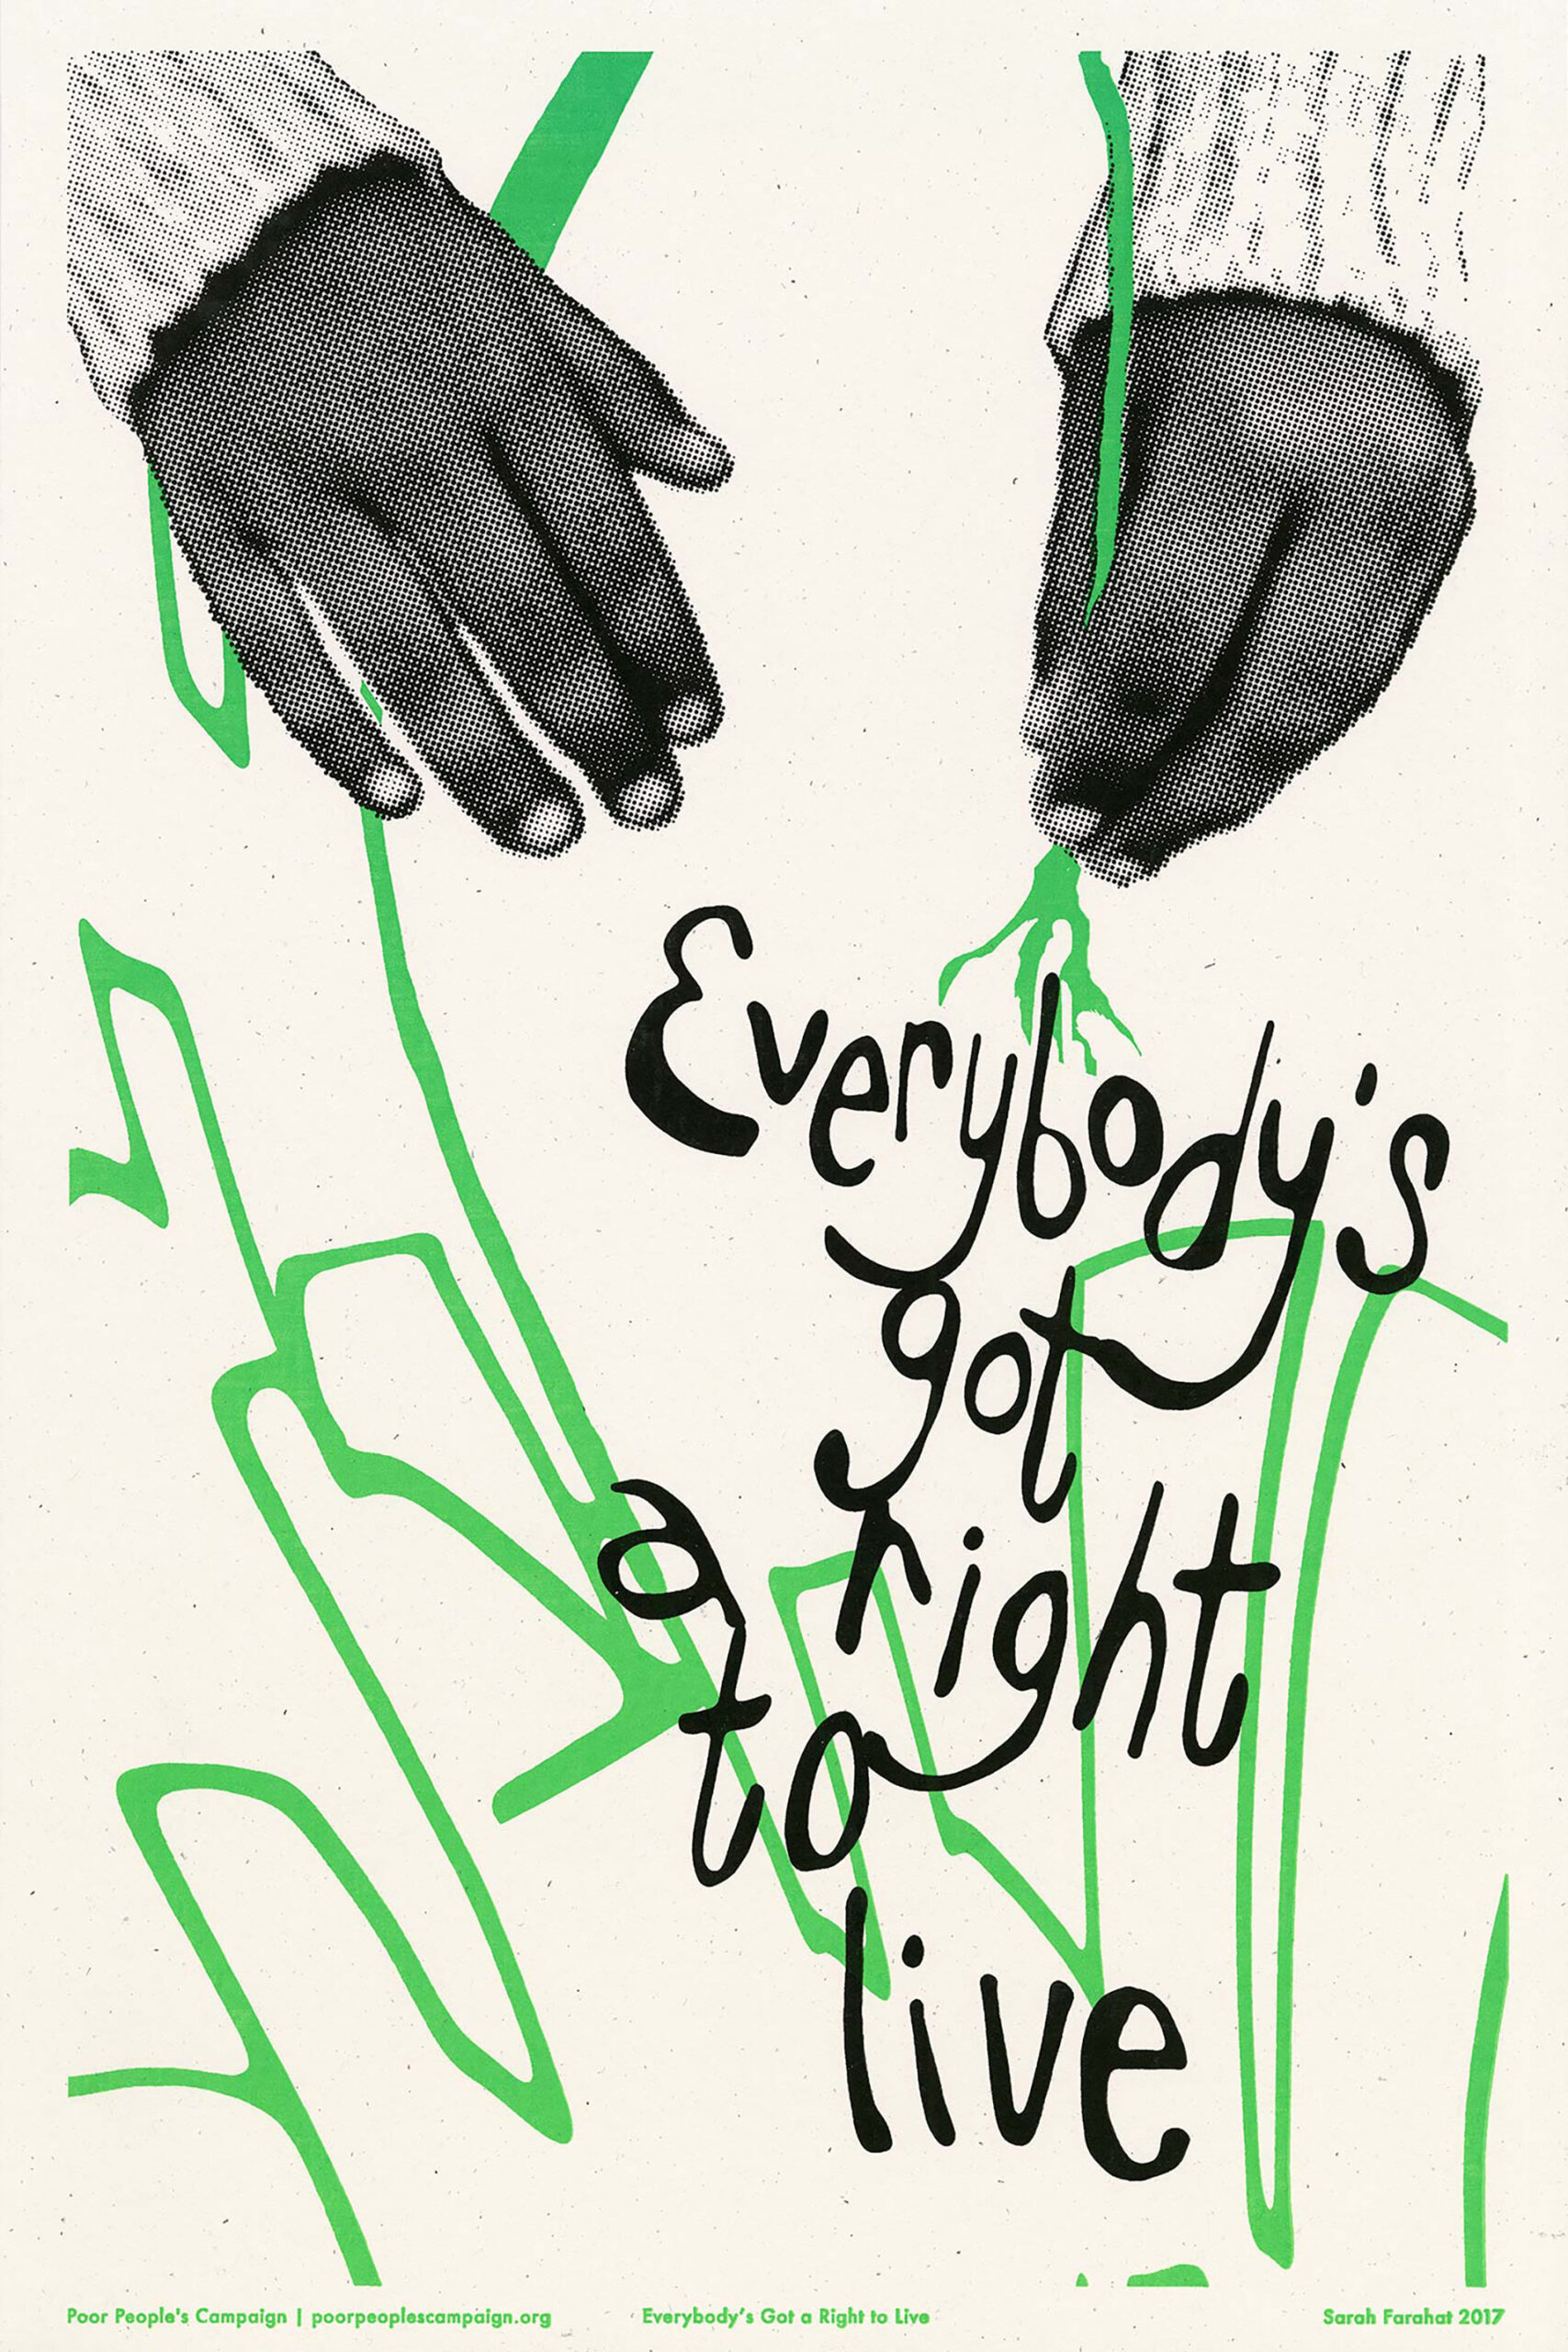 Everybody’s Got a Right to Live

Screenprint, 12.5" x 18”, 2017/reprint 2019

Designed for Justseeds Poor People’s Campaign print portfolio